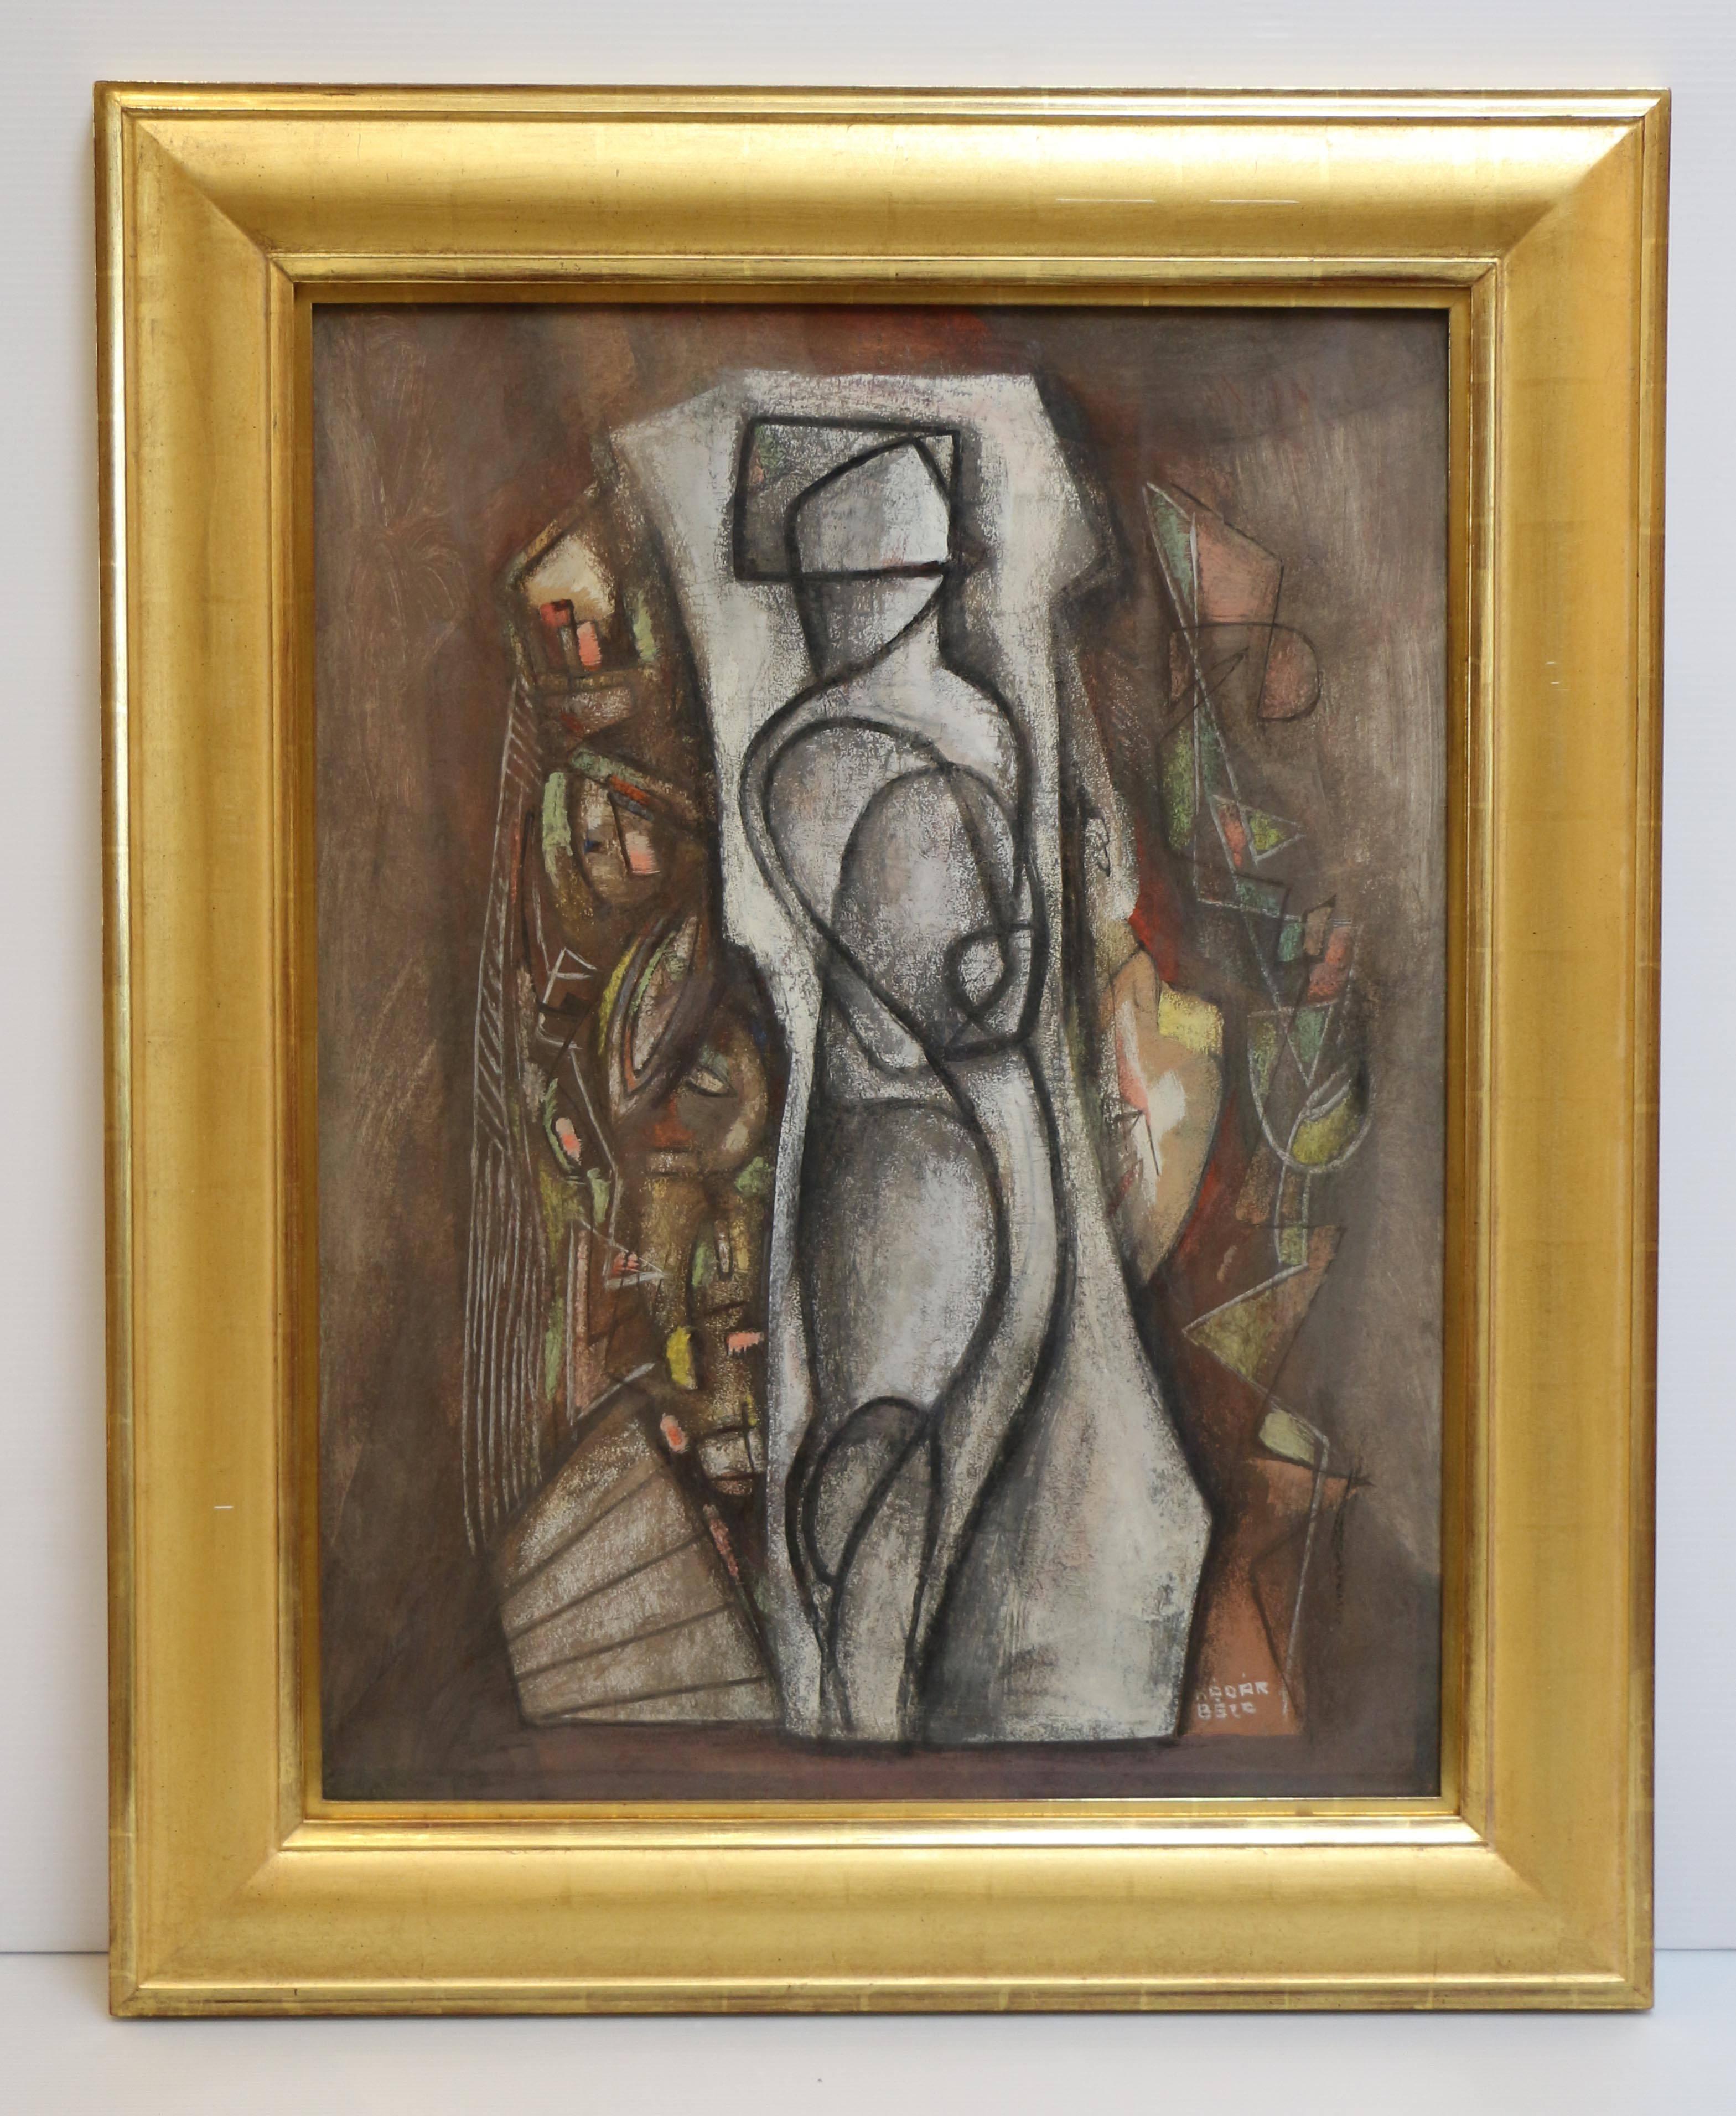 Untitled Composition with Figure, cubist work with central figure - Painting by Bela Kadar